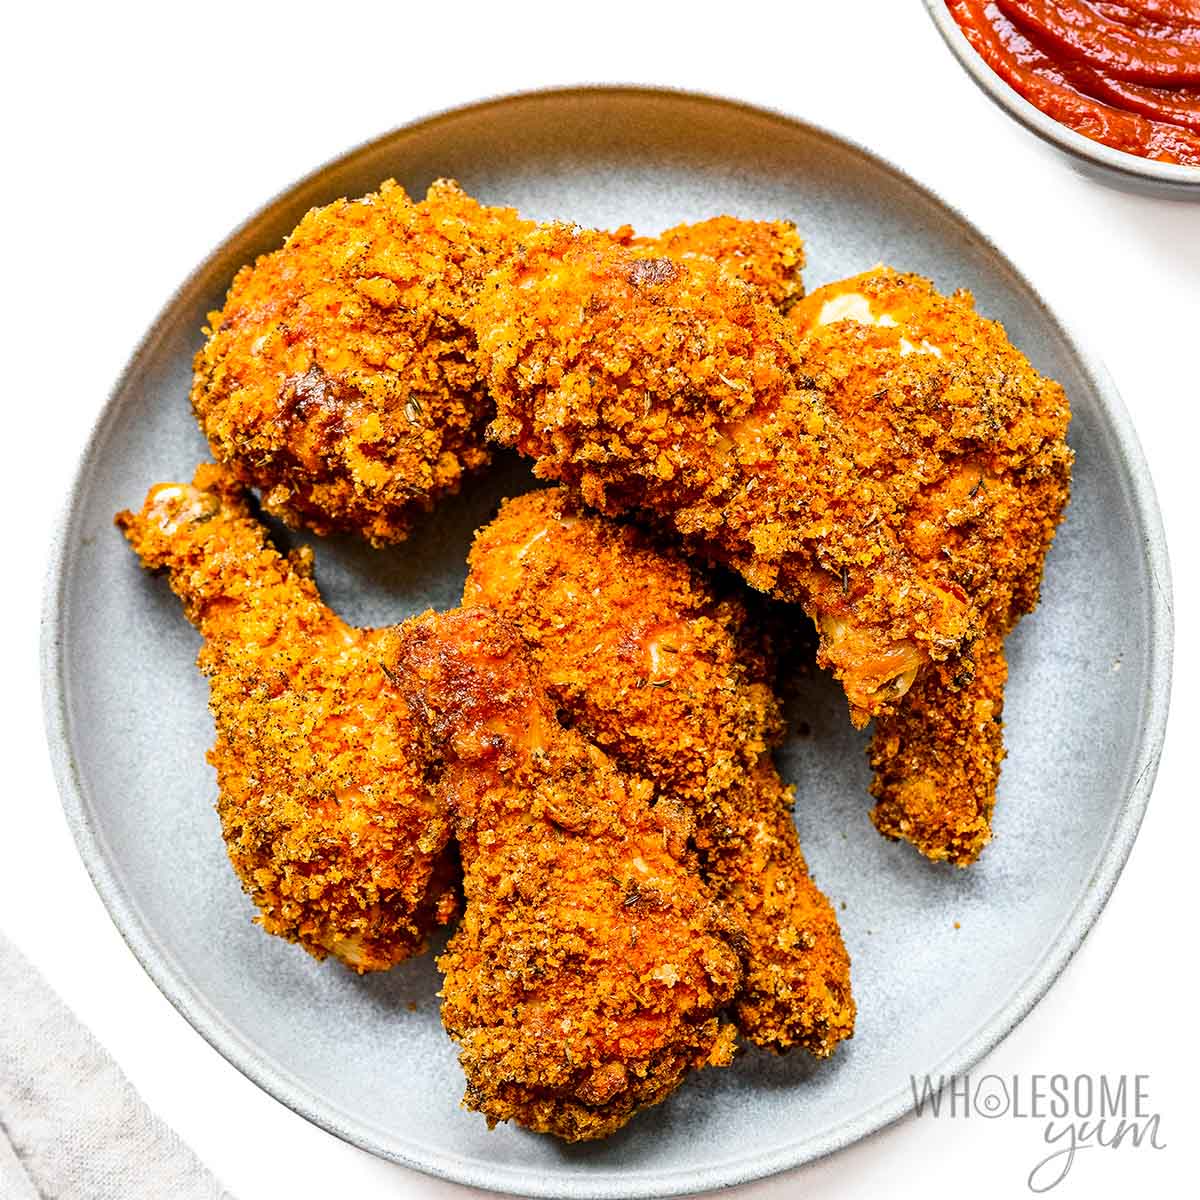 Keto Fried Chicken - Wholesome Yum - Easy healthy recipes. 10 ingredients or less.